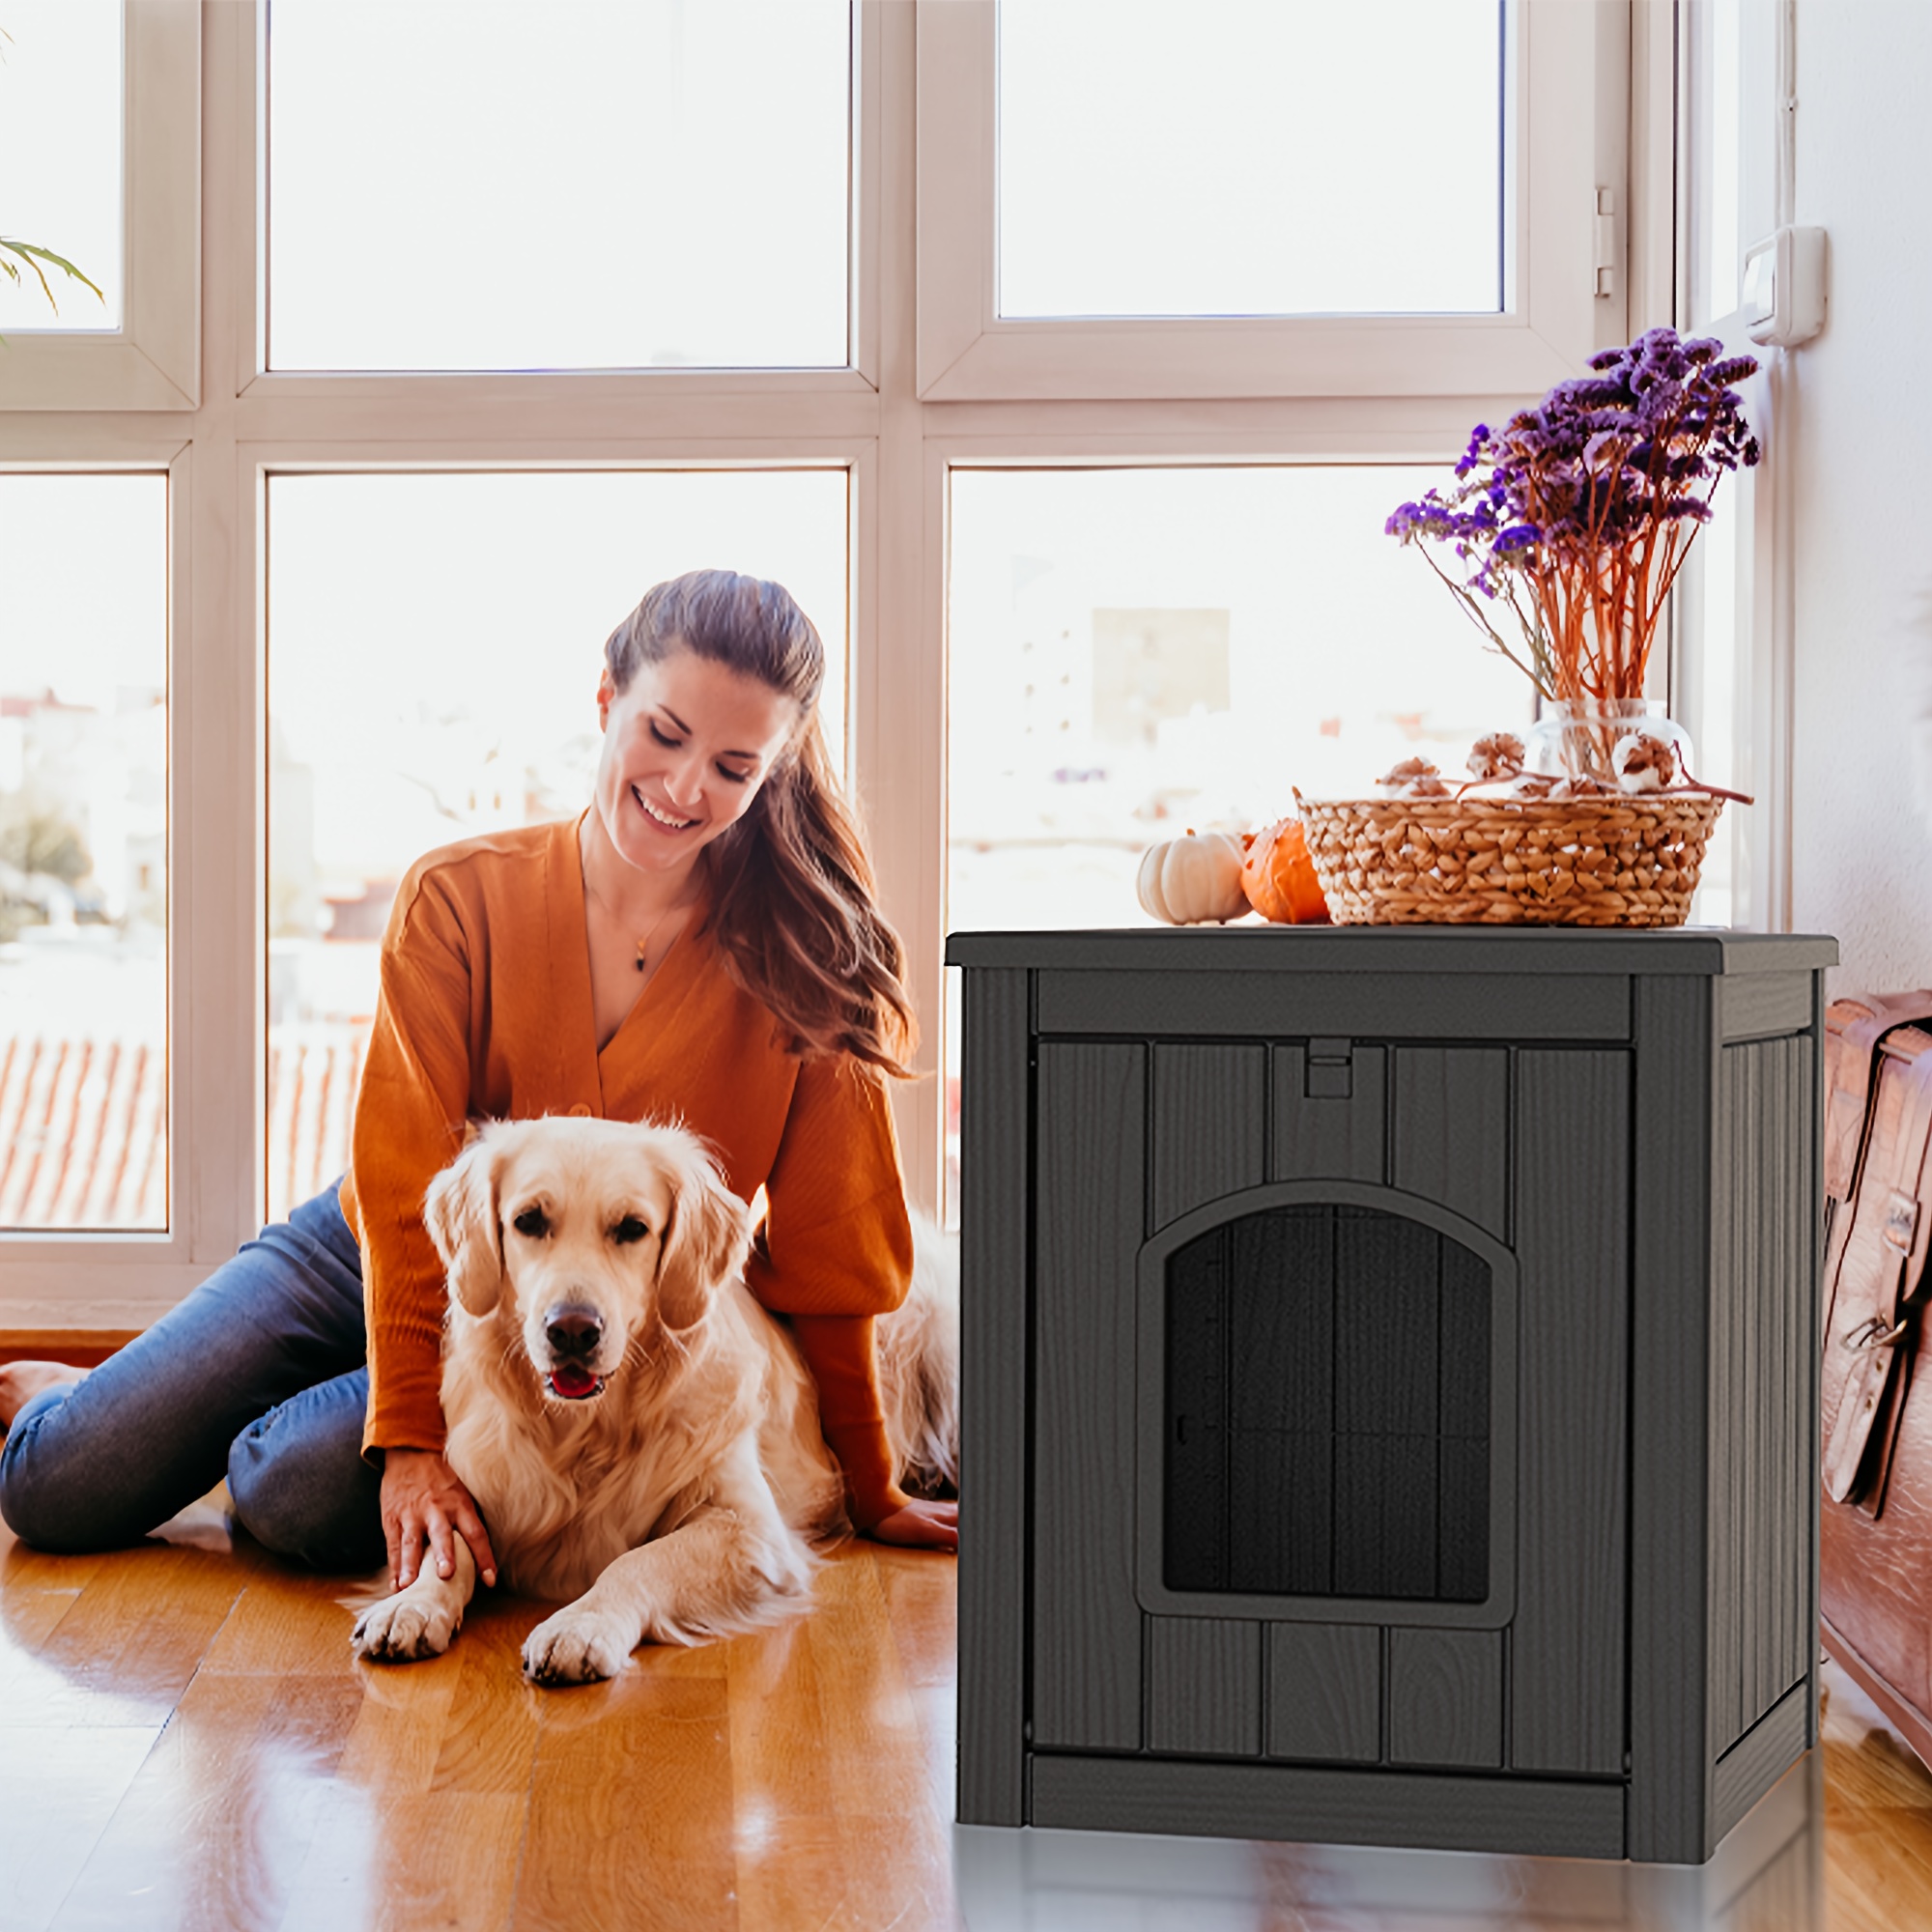 

Durable Waterproof Plastic Dog House For Small To Large Dogs - Indoor Outdoor Doghouse, Cat Duck Puppy Pet Shelter, Portable And Easy Assembly